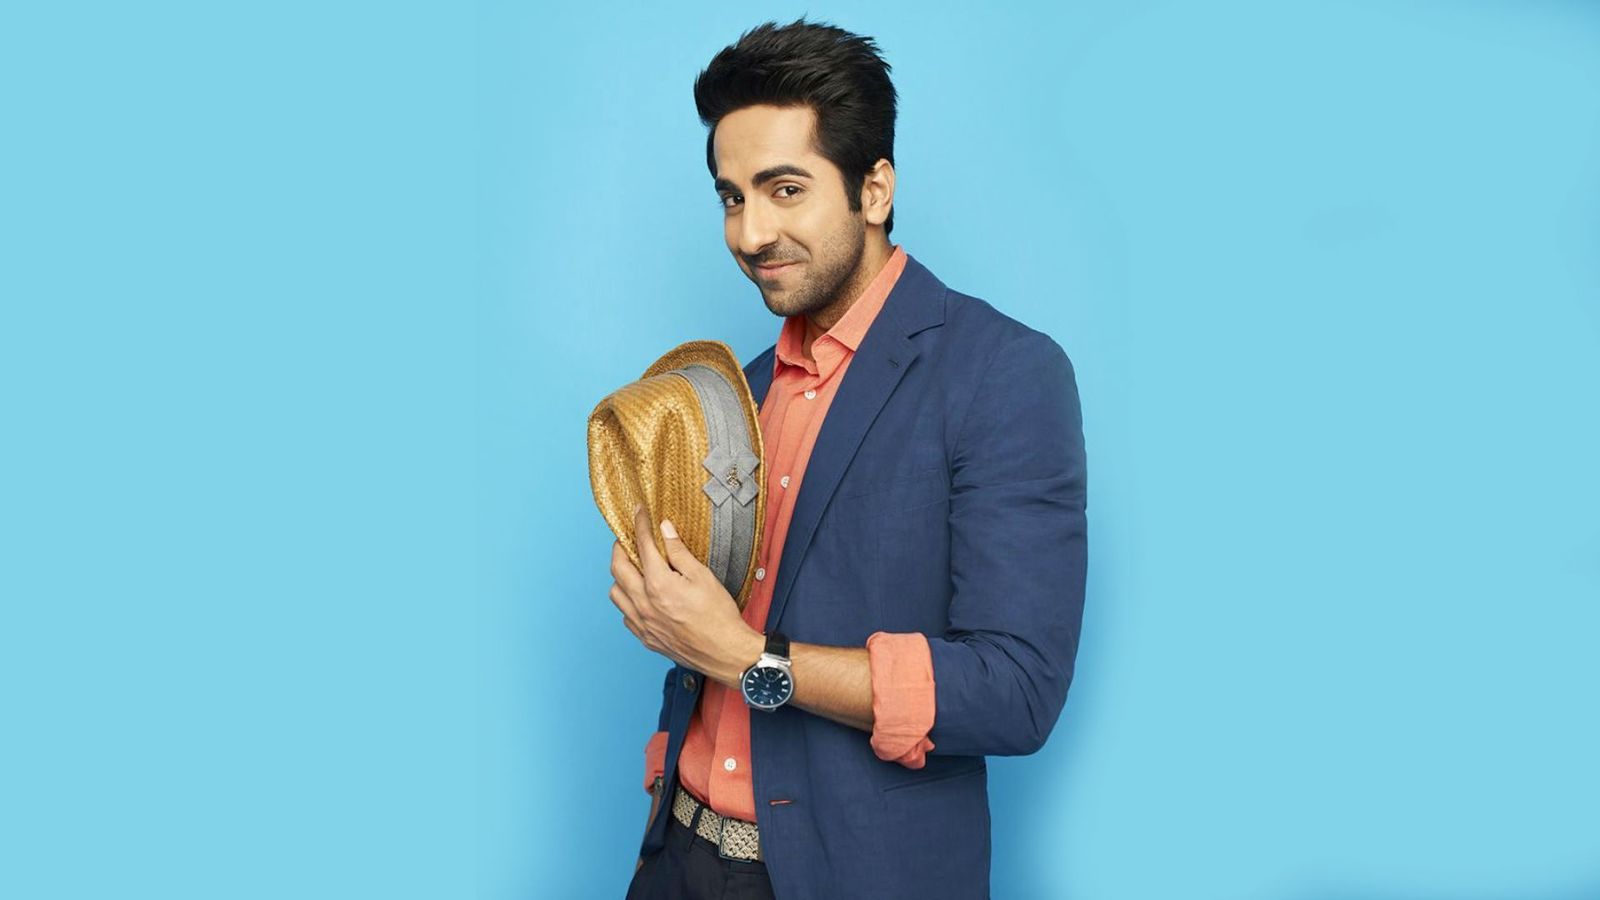 I've Carved A Niche For Myself: Ayushmann Khurrana On The Roles He Does In Films